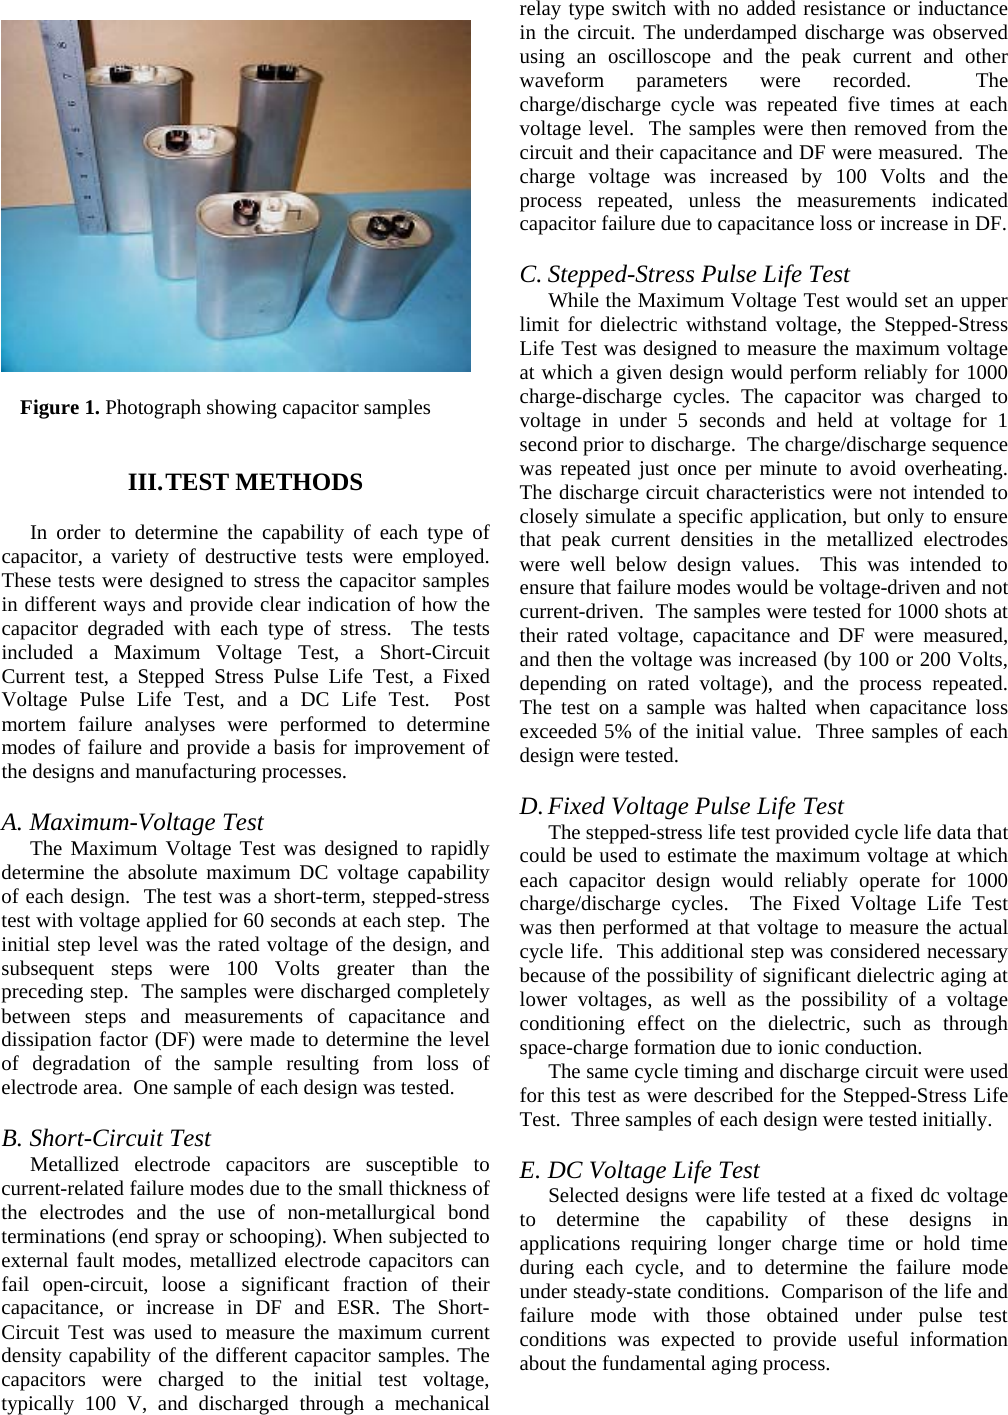 Page 3 of 5 - PREPARATION OF PAPERS FOR THE 2003 IEEE INTERNATIONAL CONFERENCE ON High-energy-capacitor-characterization